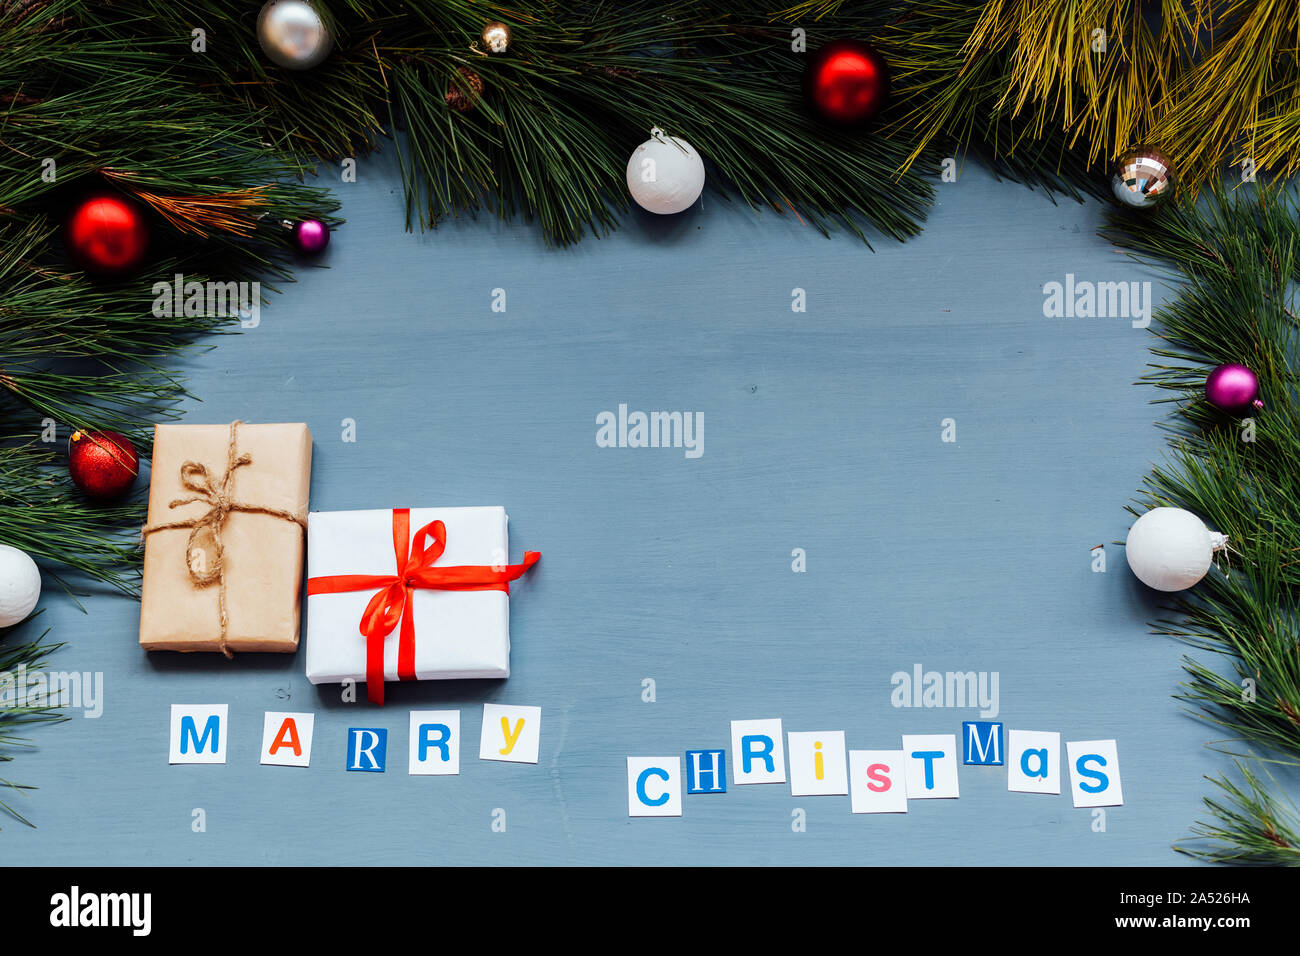 Christmas Background Christmas Decorations Gifts New Year Postcard Stock Photo Alamy